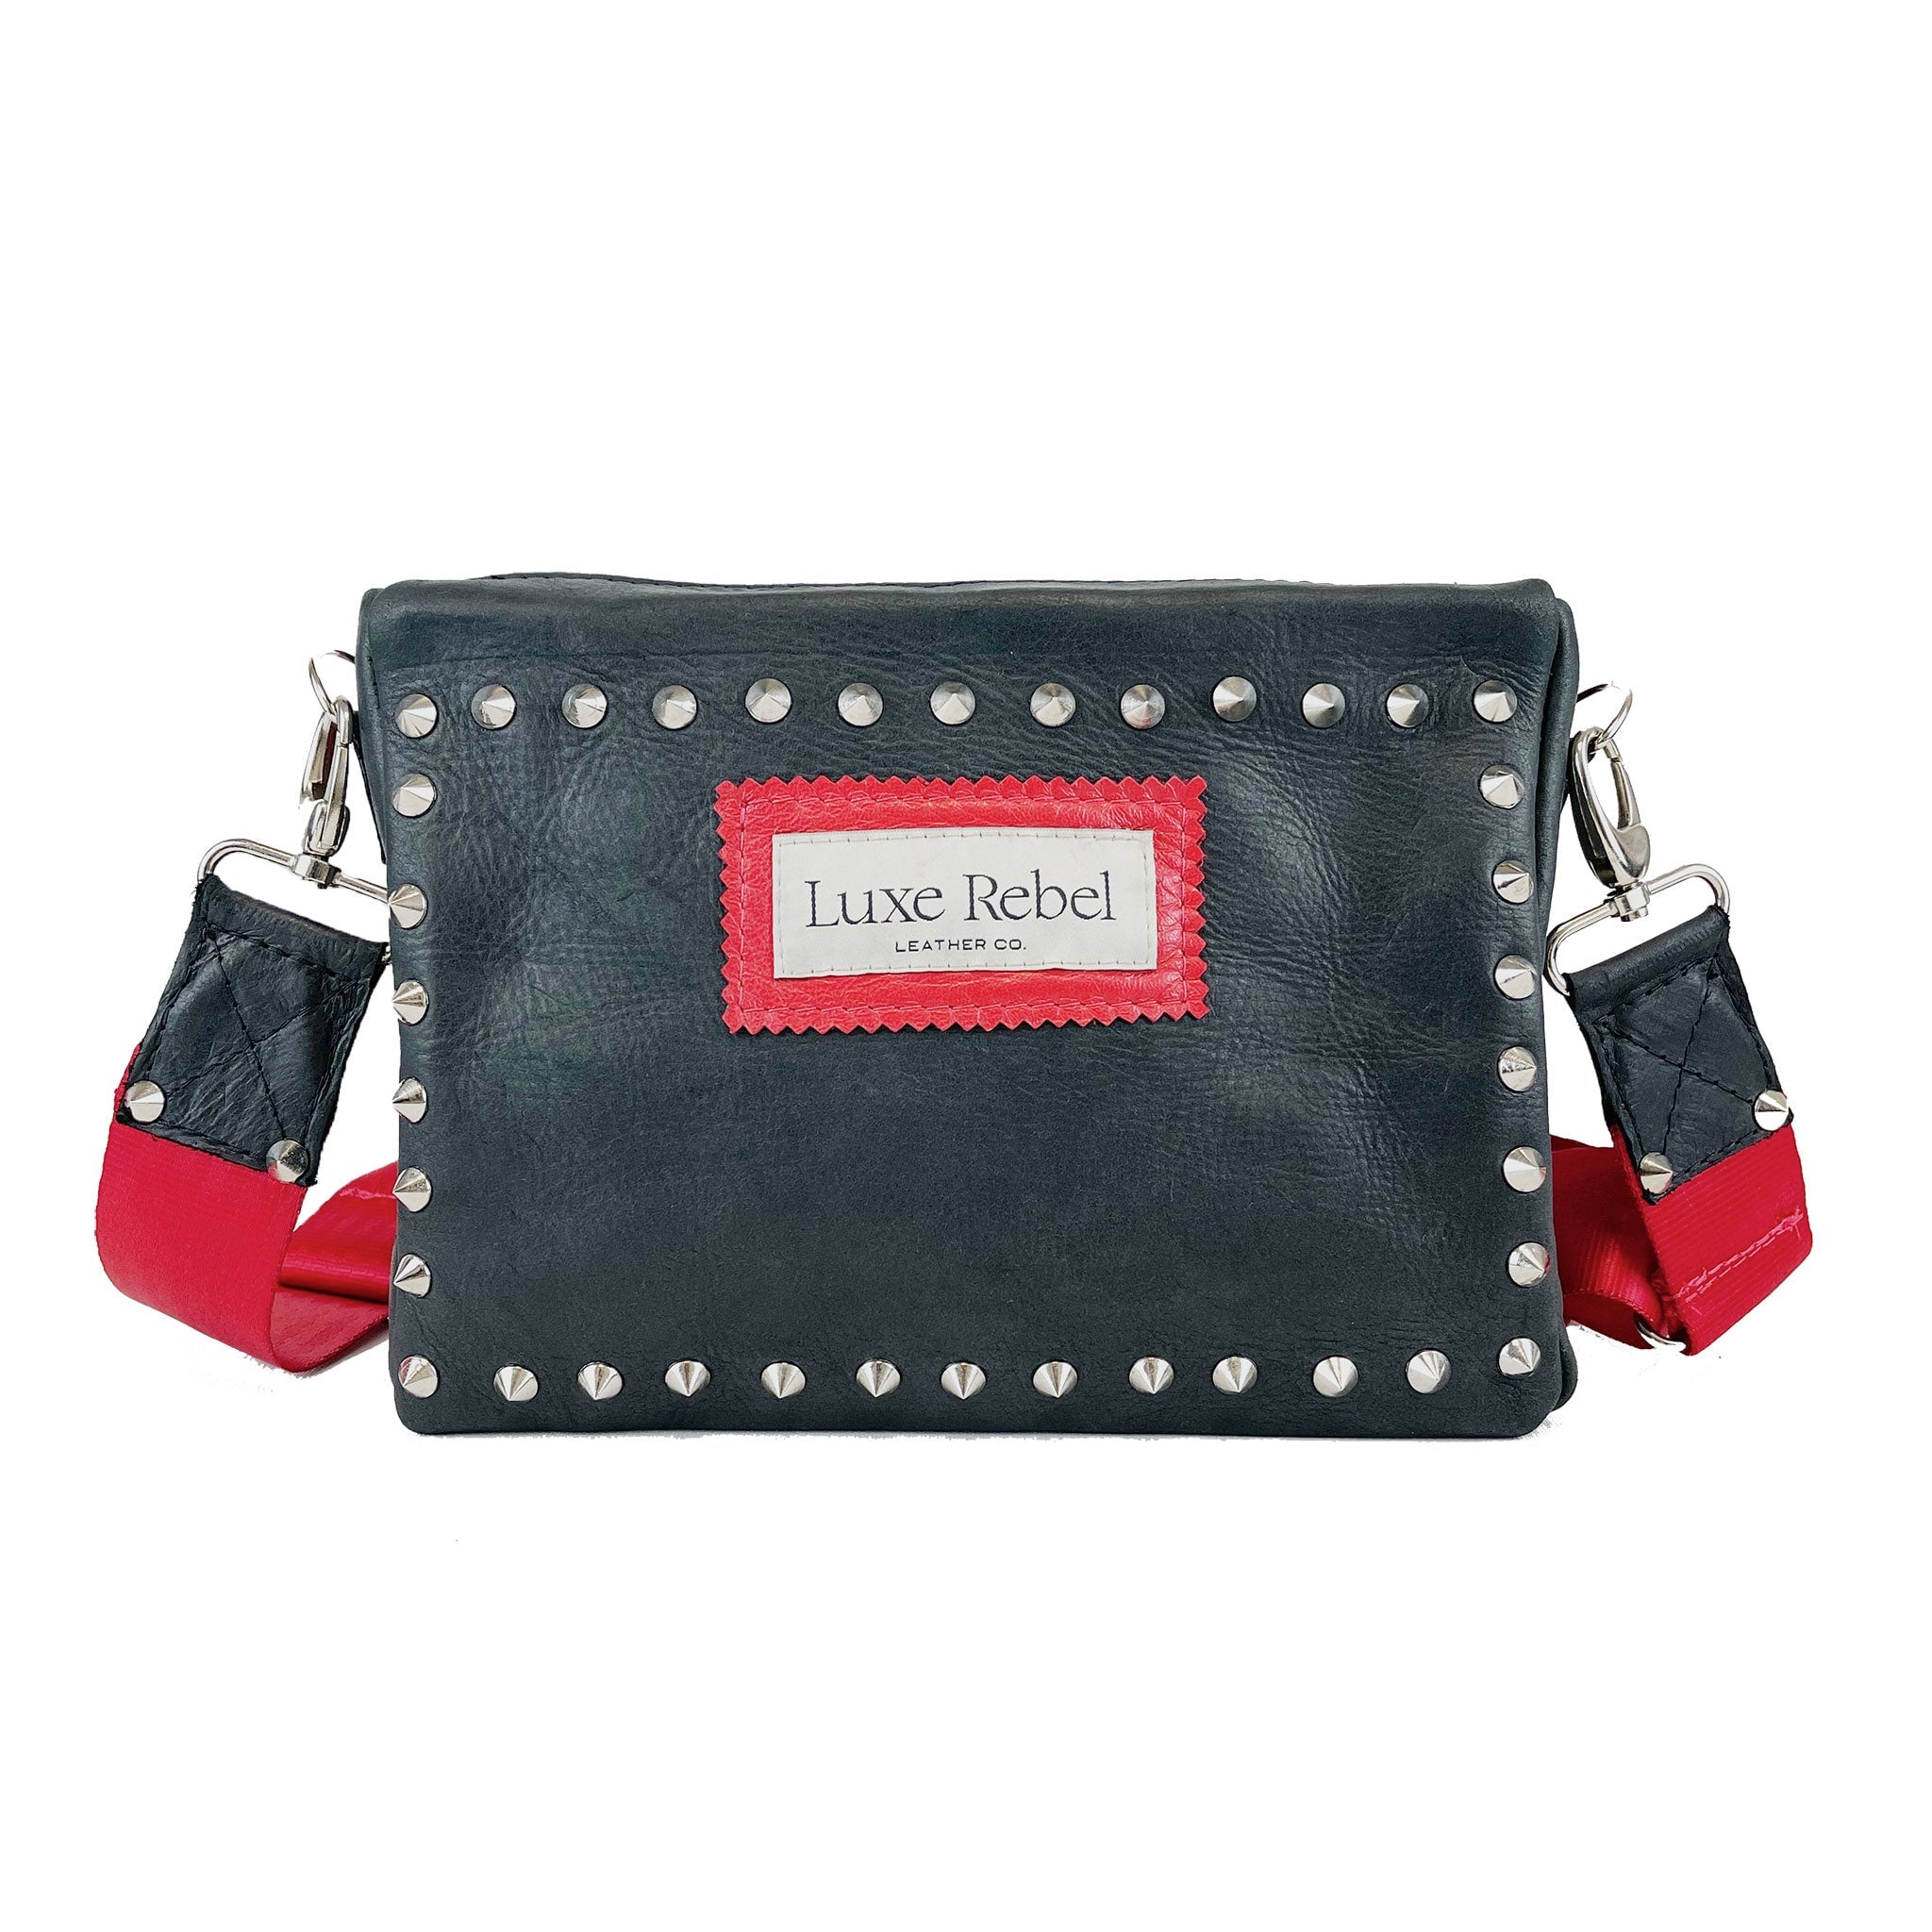 Leather Studded Cross Body Bag – Luxe Rebel Leather Co